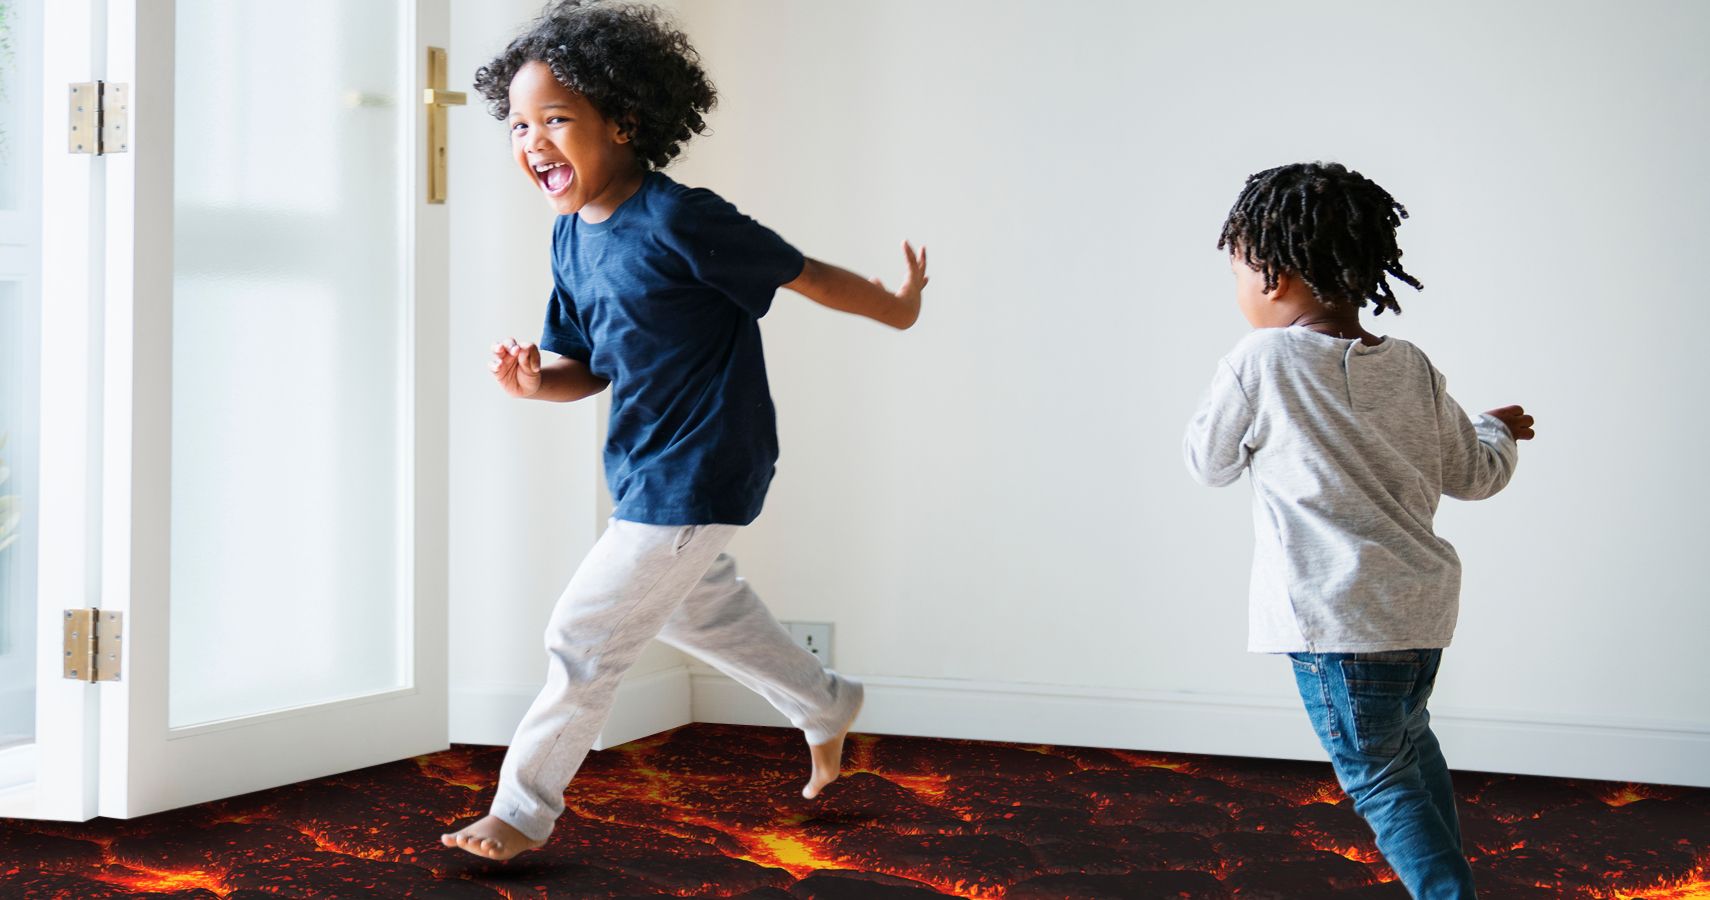 5 Creative Variations Of ‘The Floor Is Lava’ Game To Play With The Kids